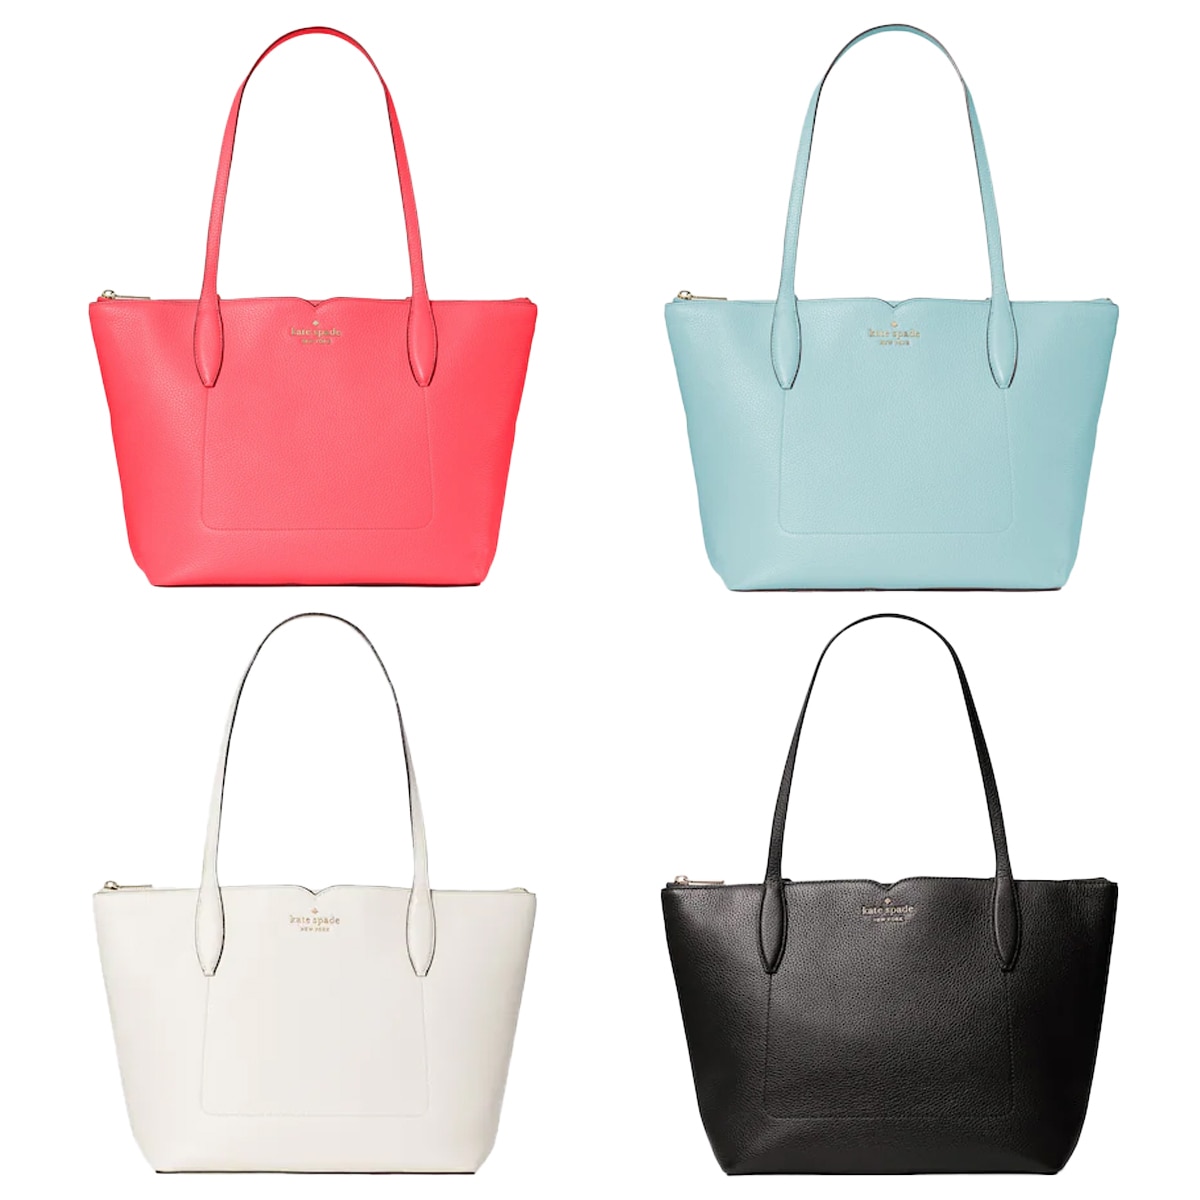 Kate Spade 24-Hour Flash Deal: Get This $400 Tote Bag for Just $99